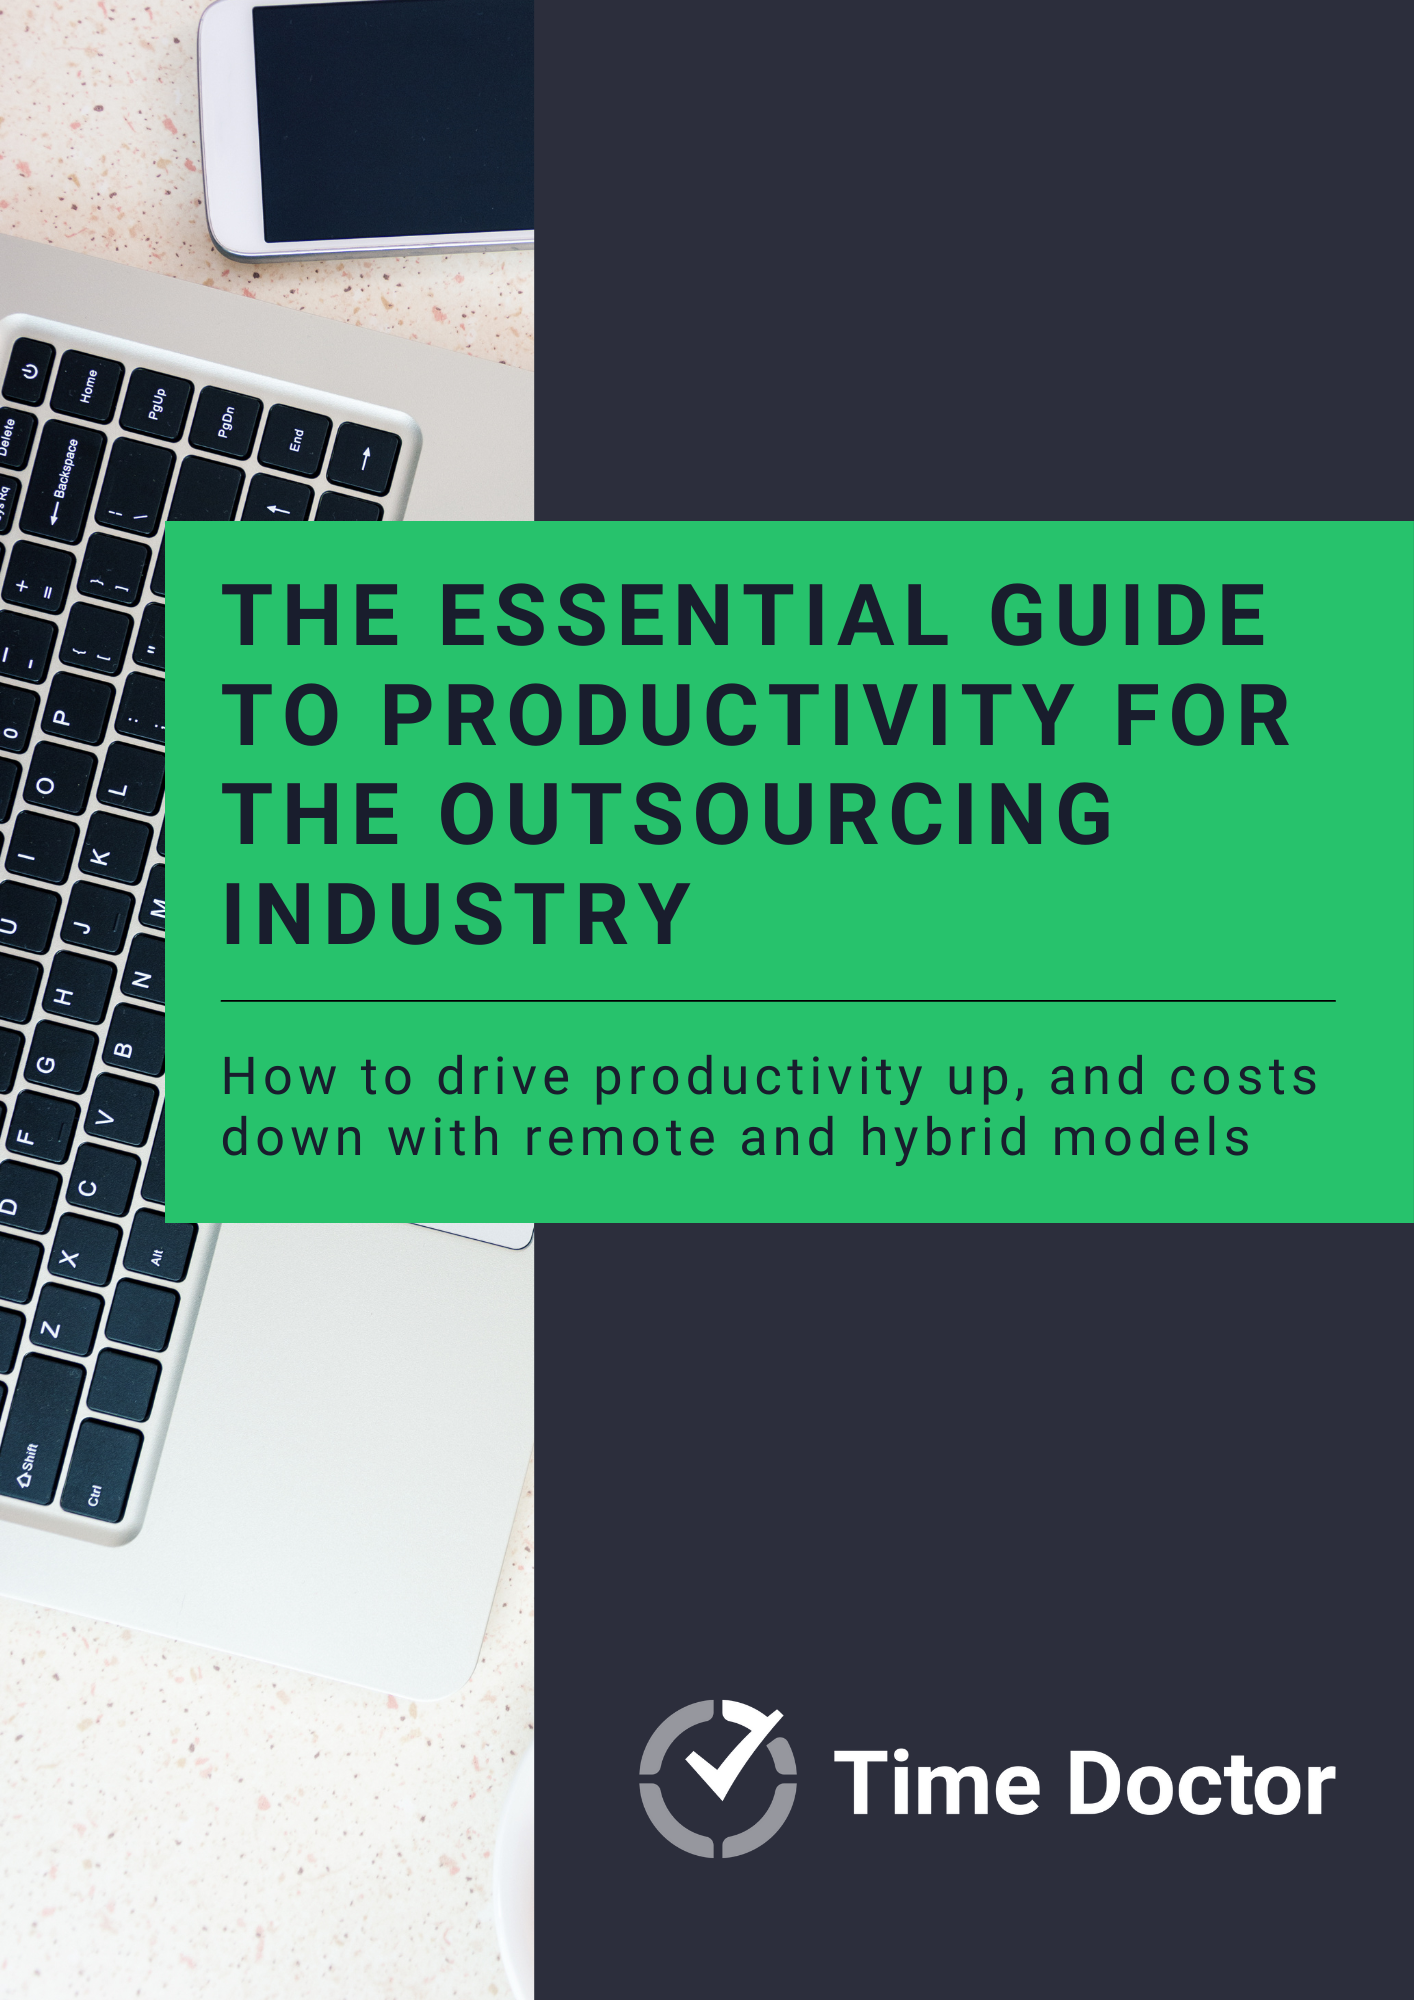 The Essential Guide to Productivity for the Outsourcing Industry